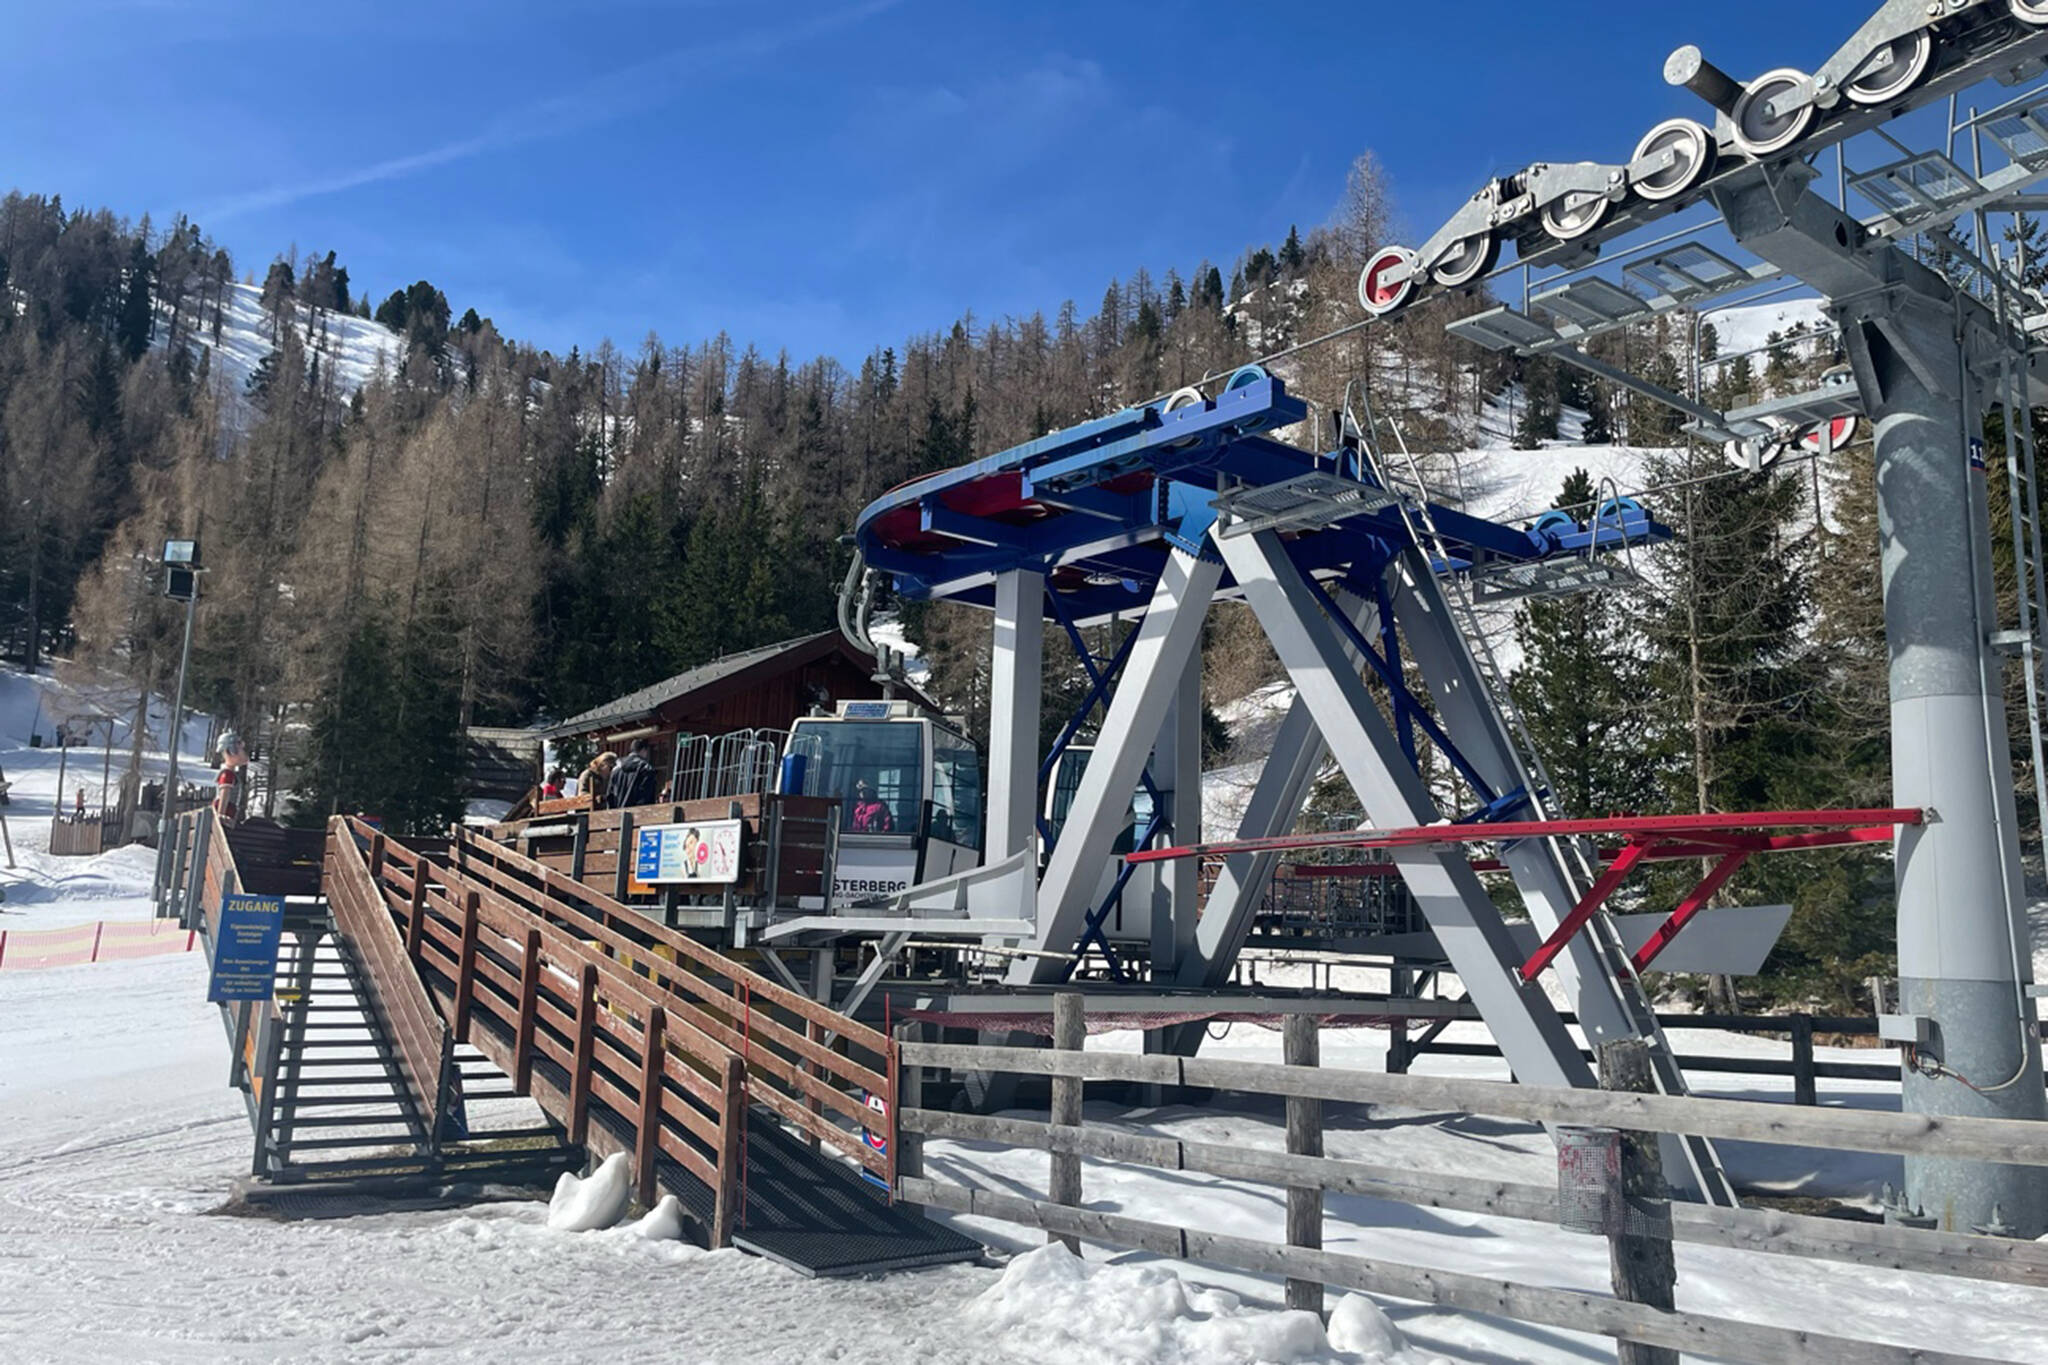 This photo shows a gondola in Austria recently purchased by the City and Borough of Juneau for the Eaglecrest Ski Area. (Courtesy Photo)